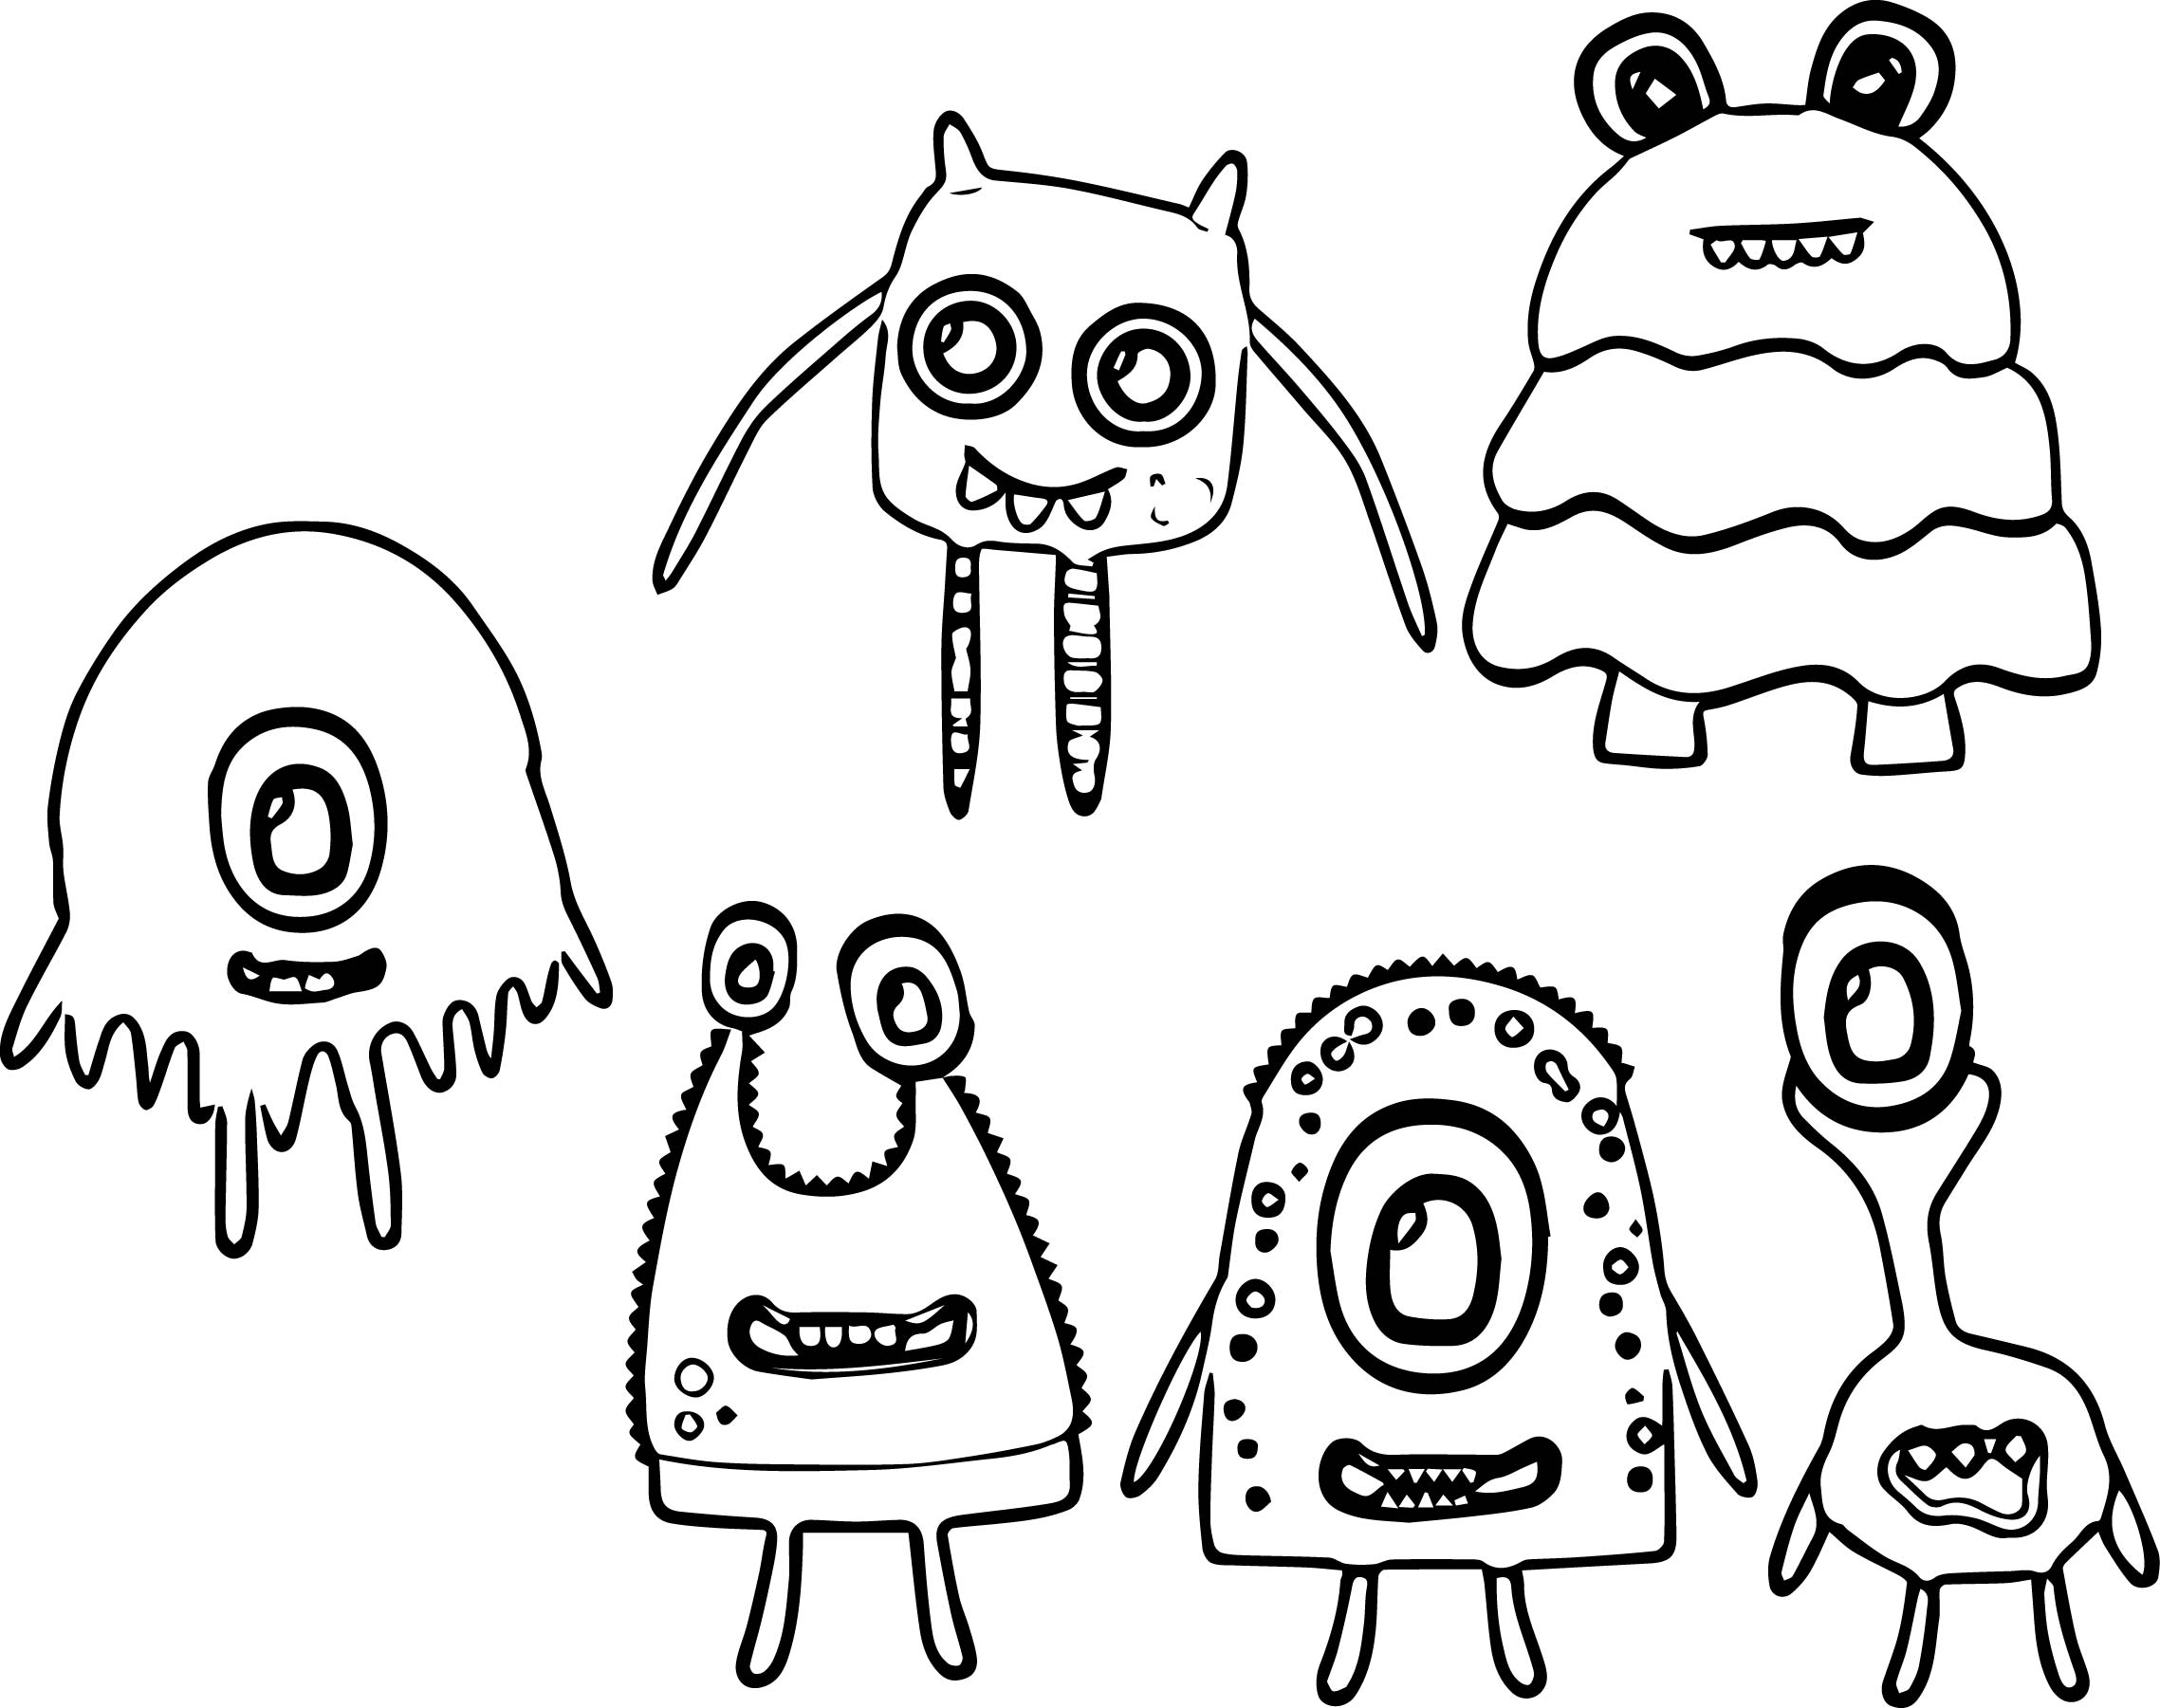 All Monster Alien Coloring Page